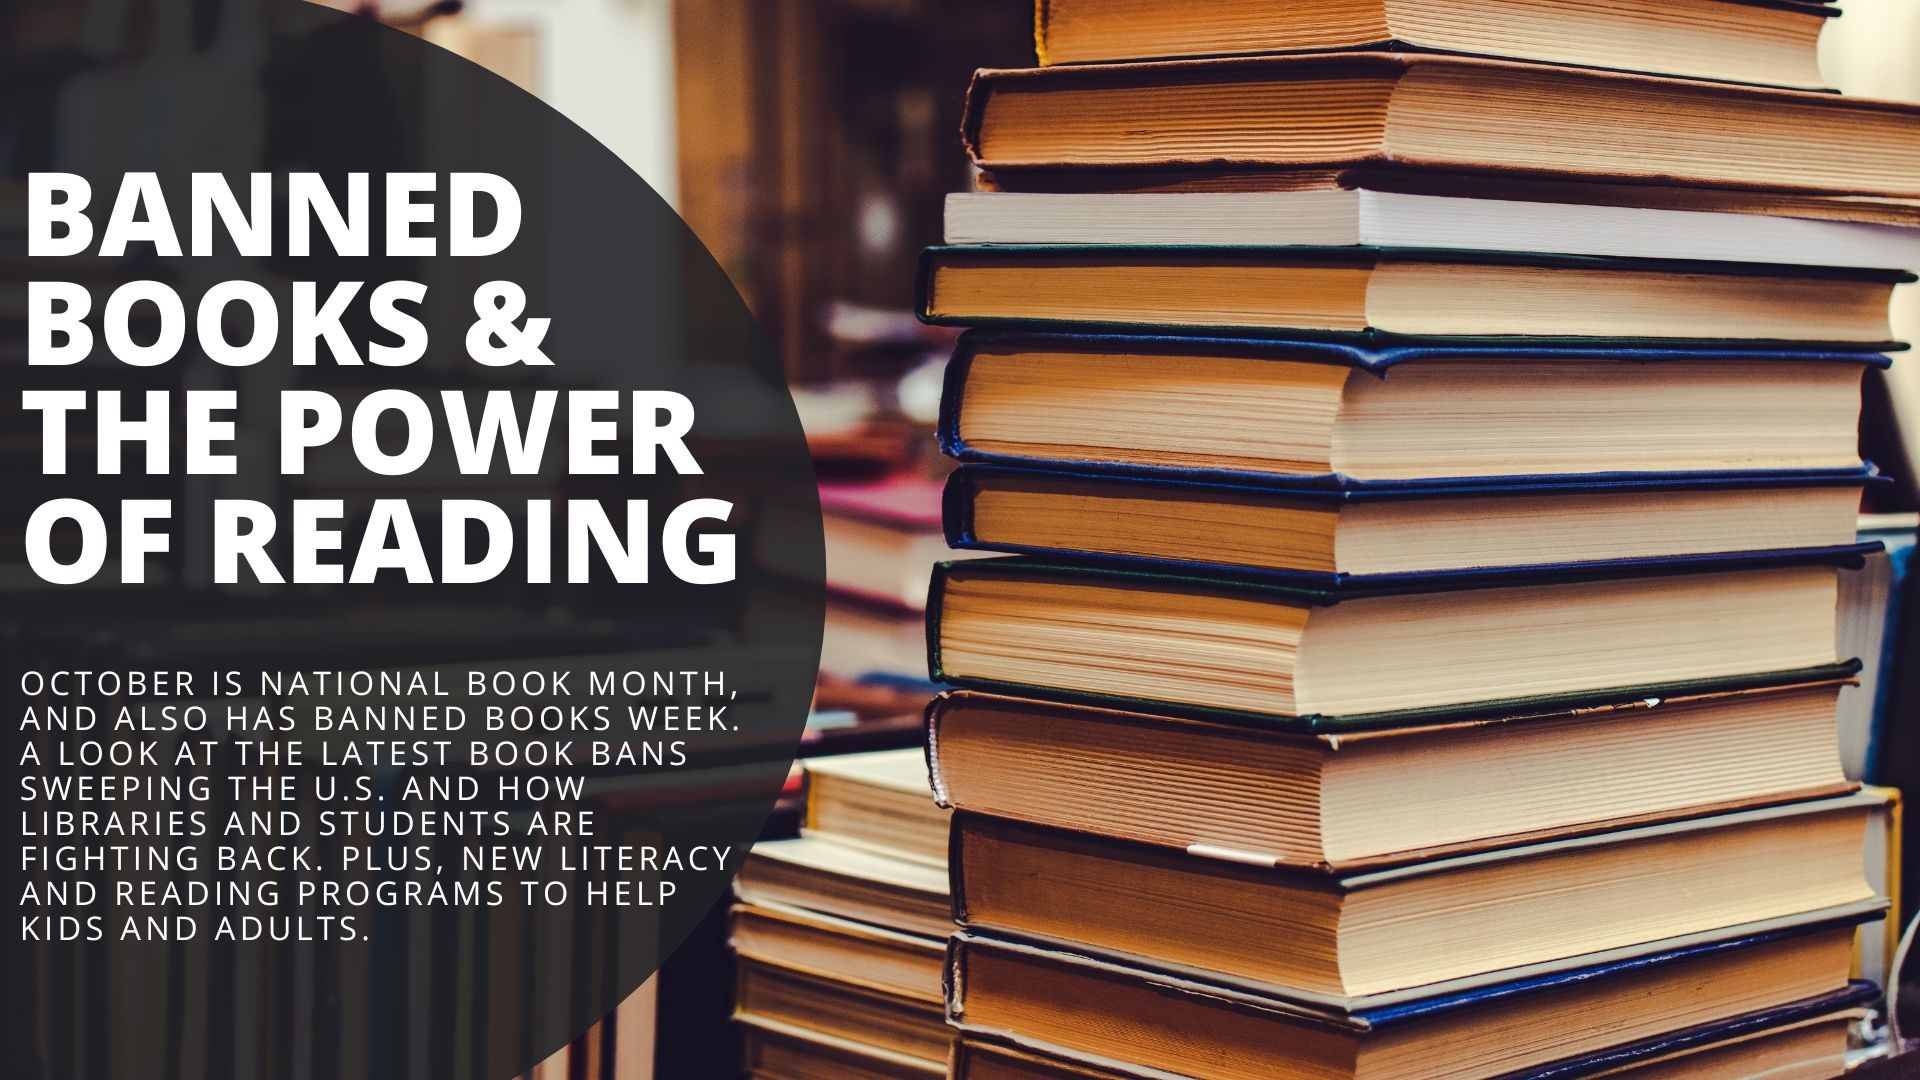 October is National Book Month, and also has Banned Books Week. A look at the latest book bans sweeping the U.S. and how libraries and students are fighting back.